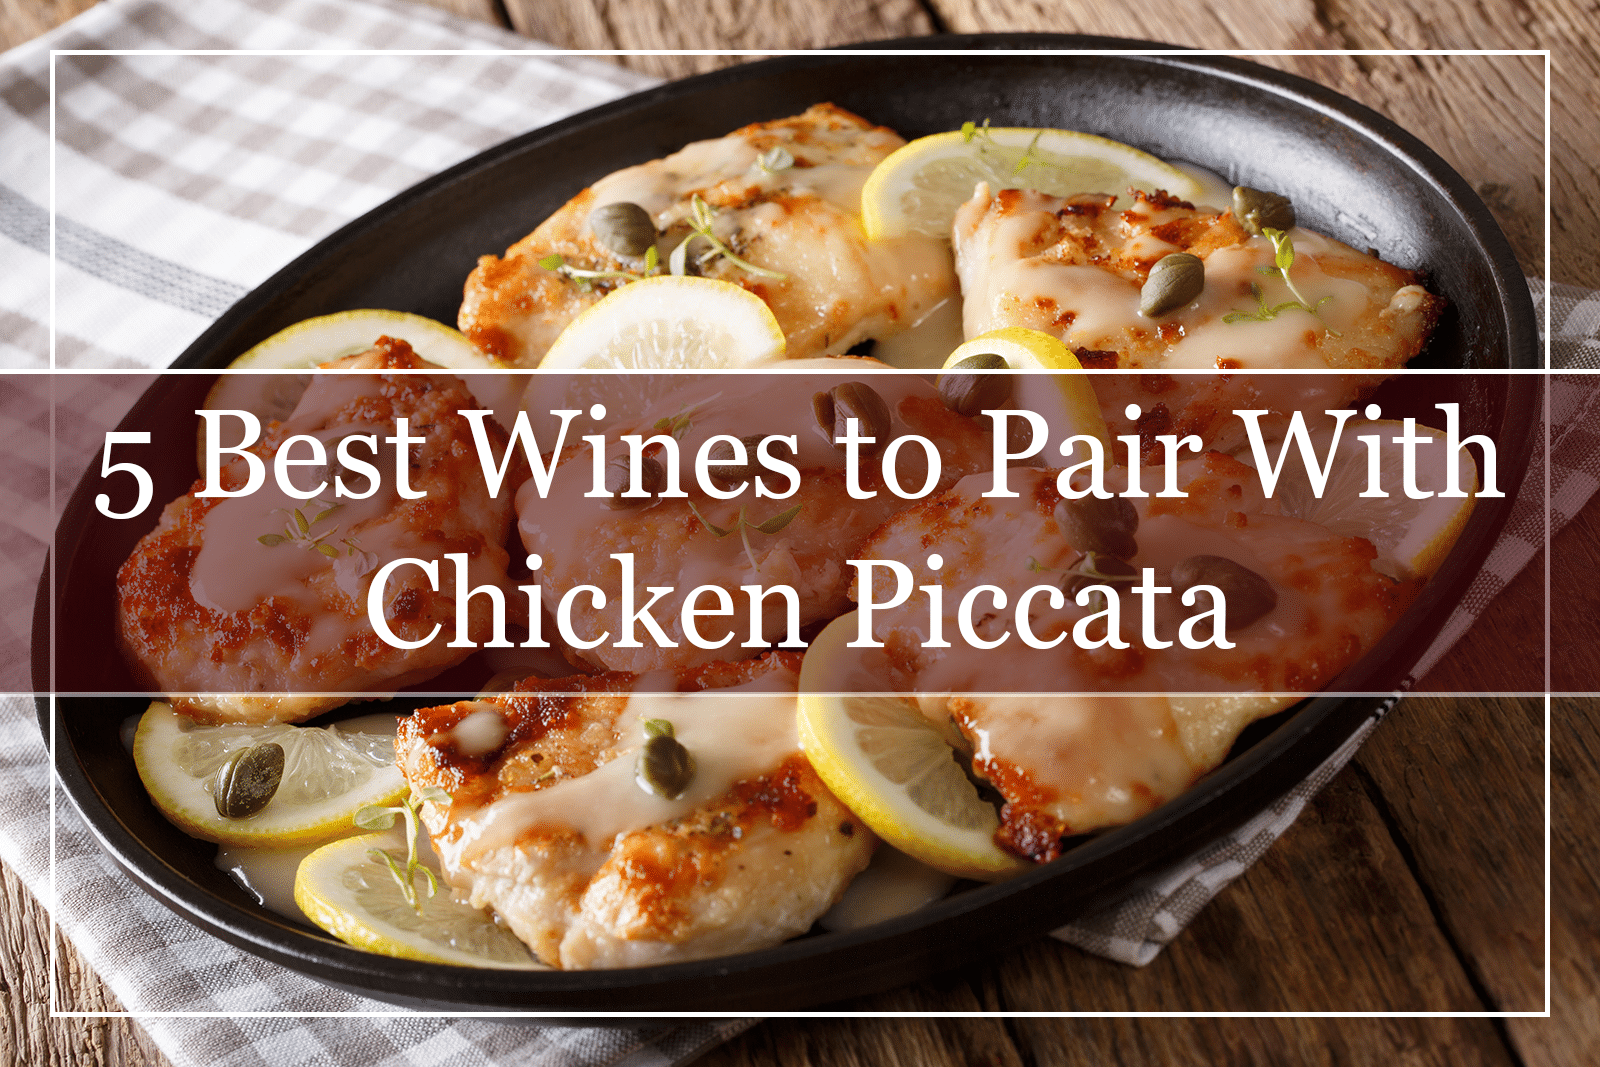 5 Best Wines to Pair With Chicken Piccata (2021)